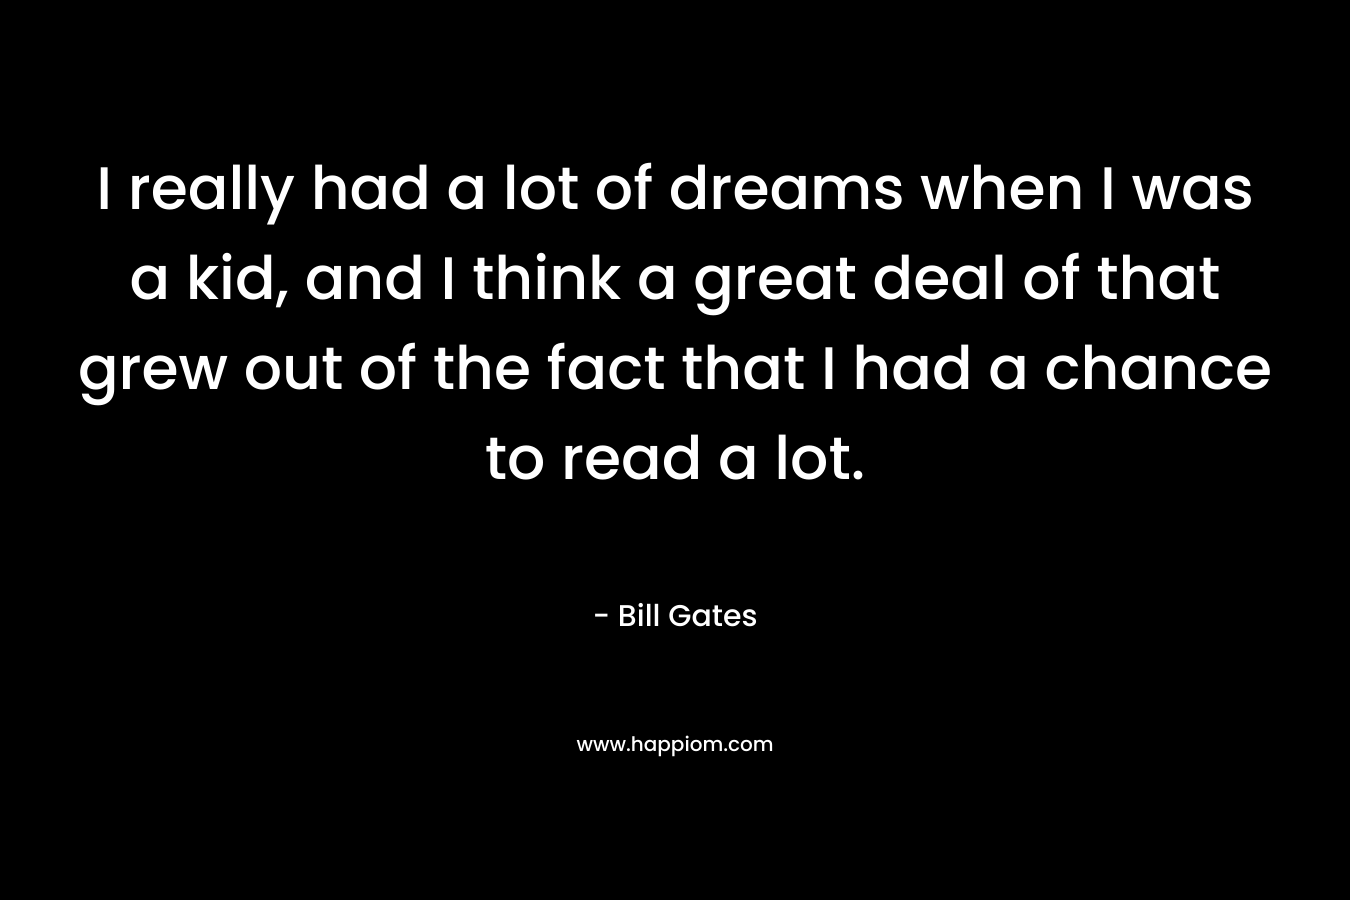 I really had a lot of dreams when I was a kid, and I think a great deal of that grew out of the fact that I had a chance to read a lot.